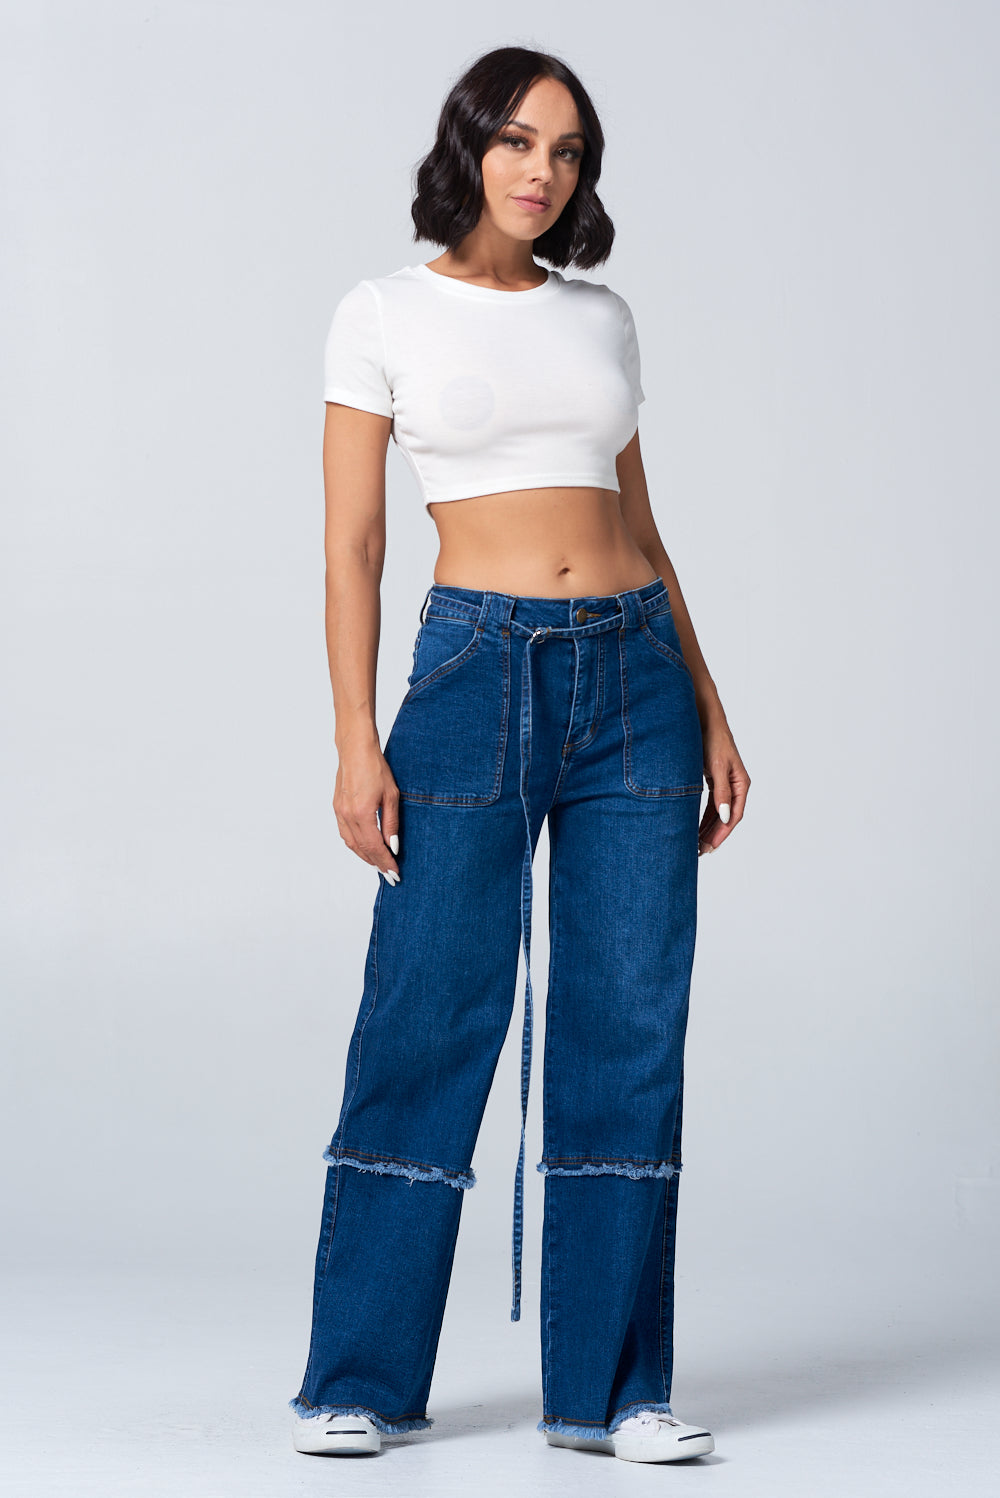 Fringed Stretch Wide Leg Utility Jeans with Detachable D Ring Belt Light DH2230